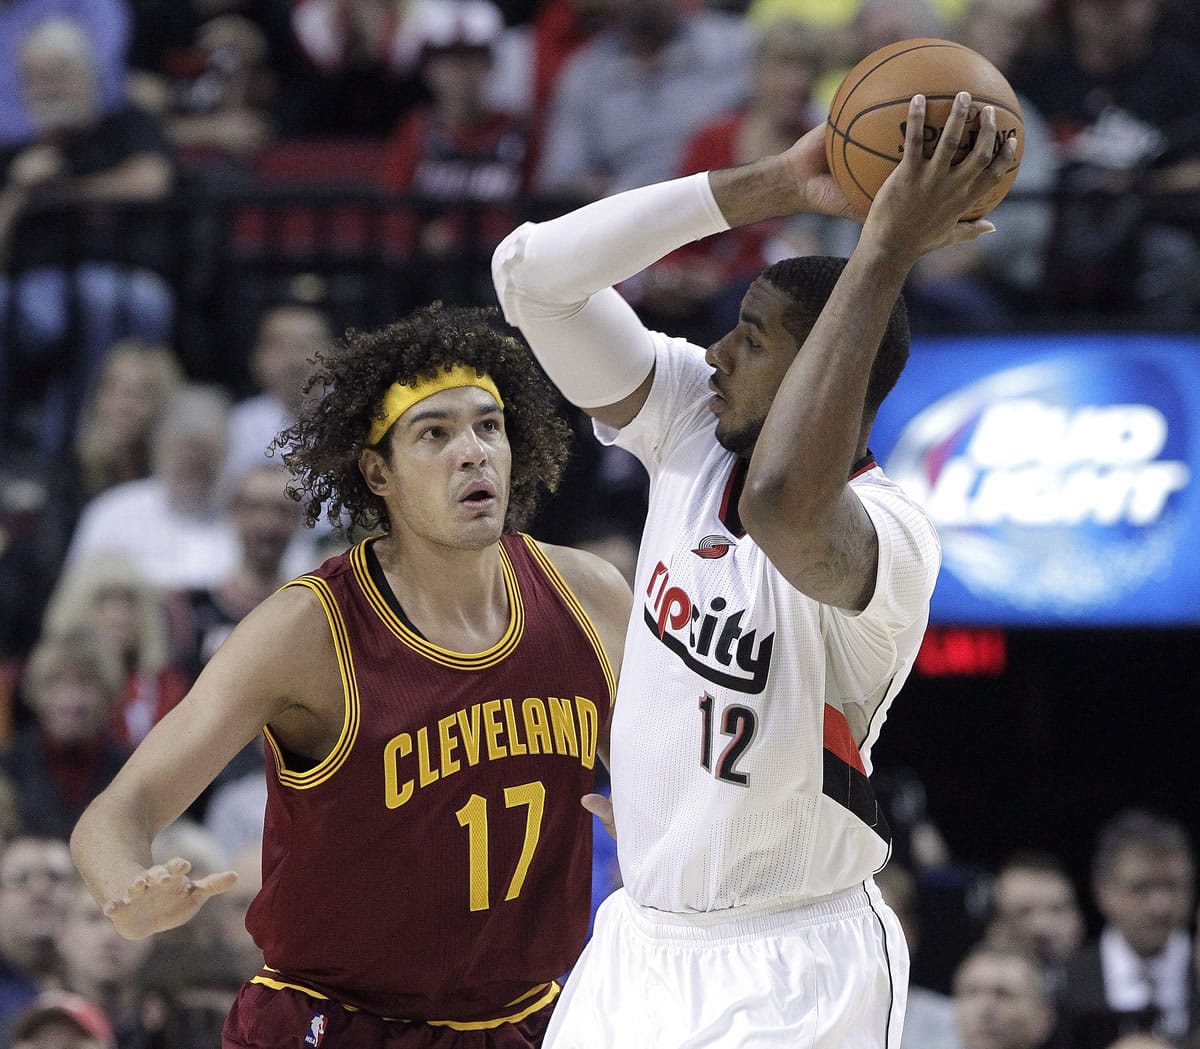 Portland Trail Blazers forward LaMarcus Aldridge, right, looks to pass as Cleveland Cavaliers center Anderson Varejao, from Brazil, defends during the first half of an NBA basketball game in Portland, Ore., Tuesday, Nov.